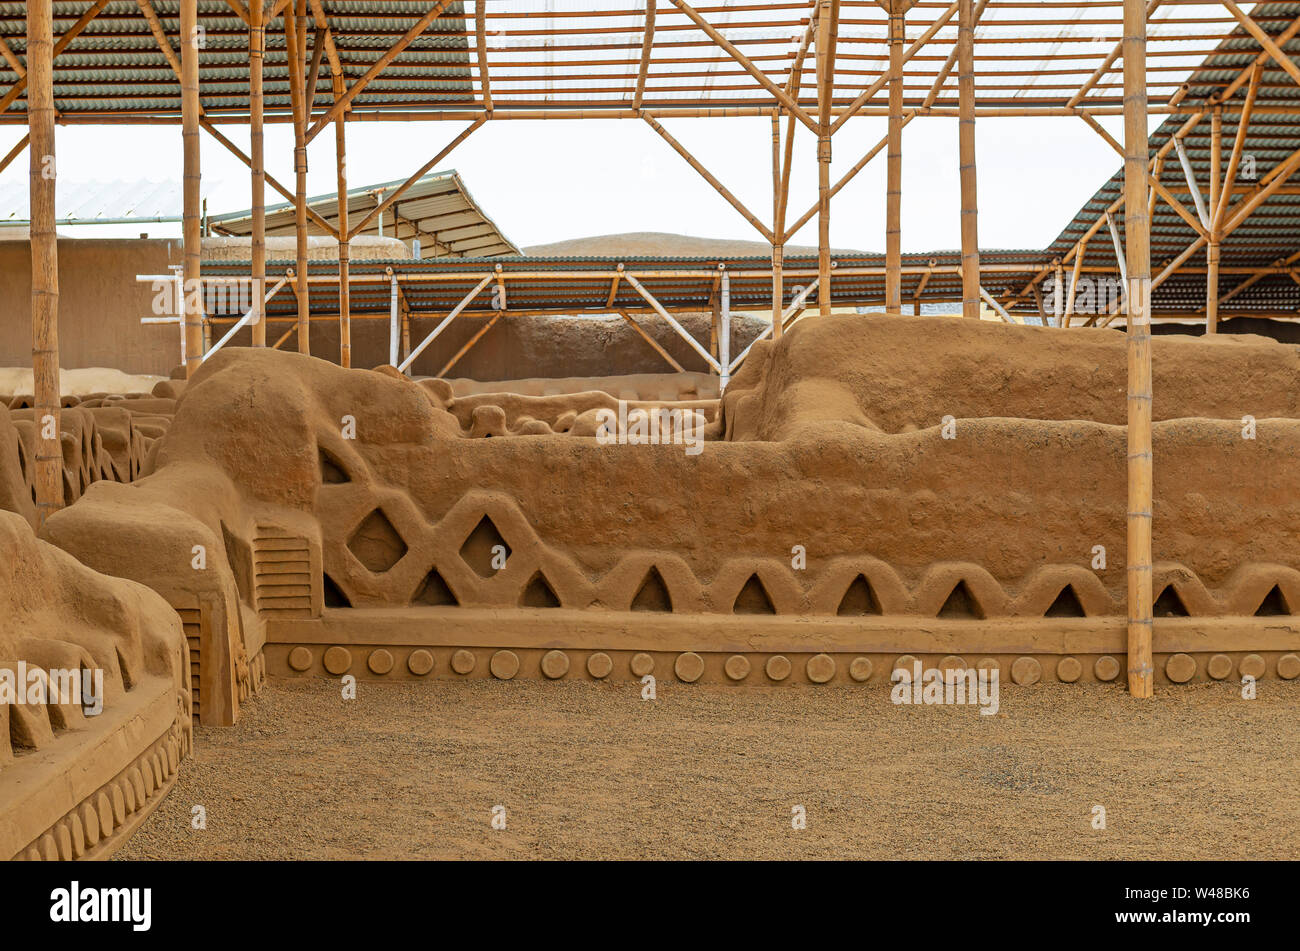 The adobe walls and decorations in the archaeological site of Chan Chan made by the Chimu civilization near Trujillo, Peru. Stock Photo